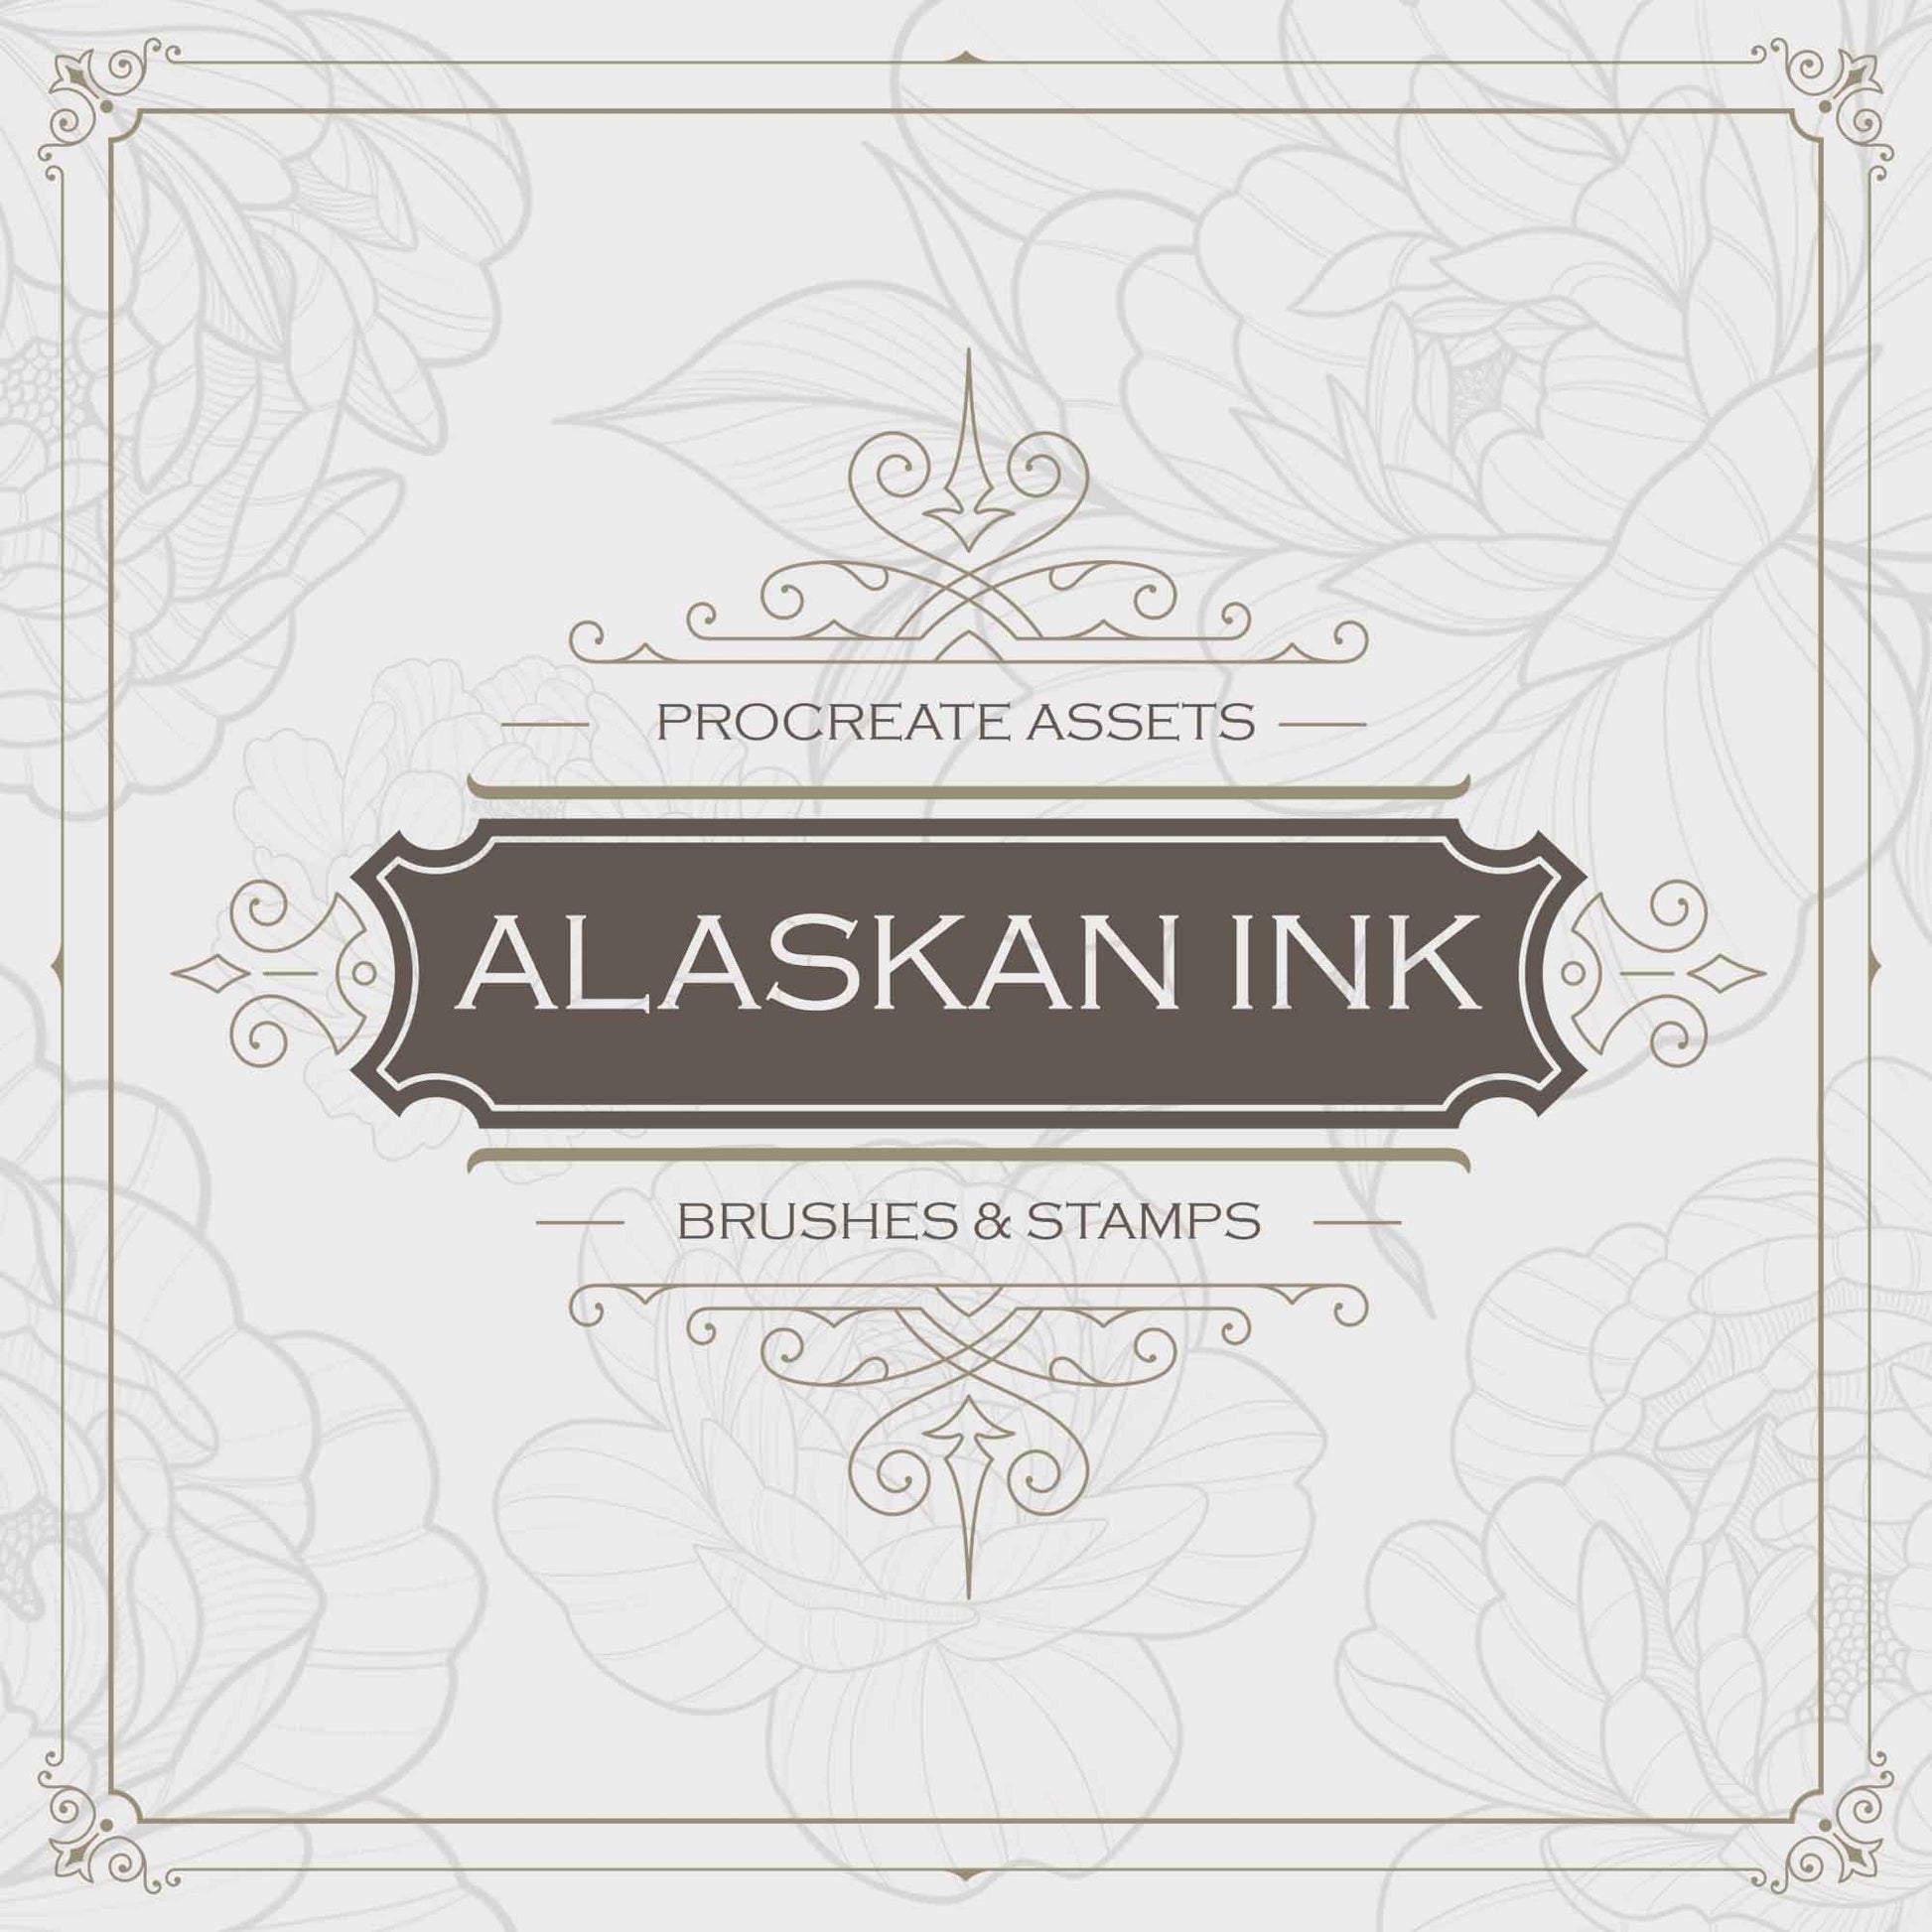 400 Flowers Tattoo Brushes for Procreate application created by Alaskan ink studio